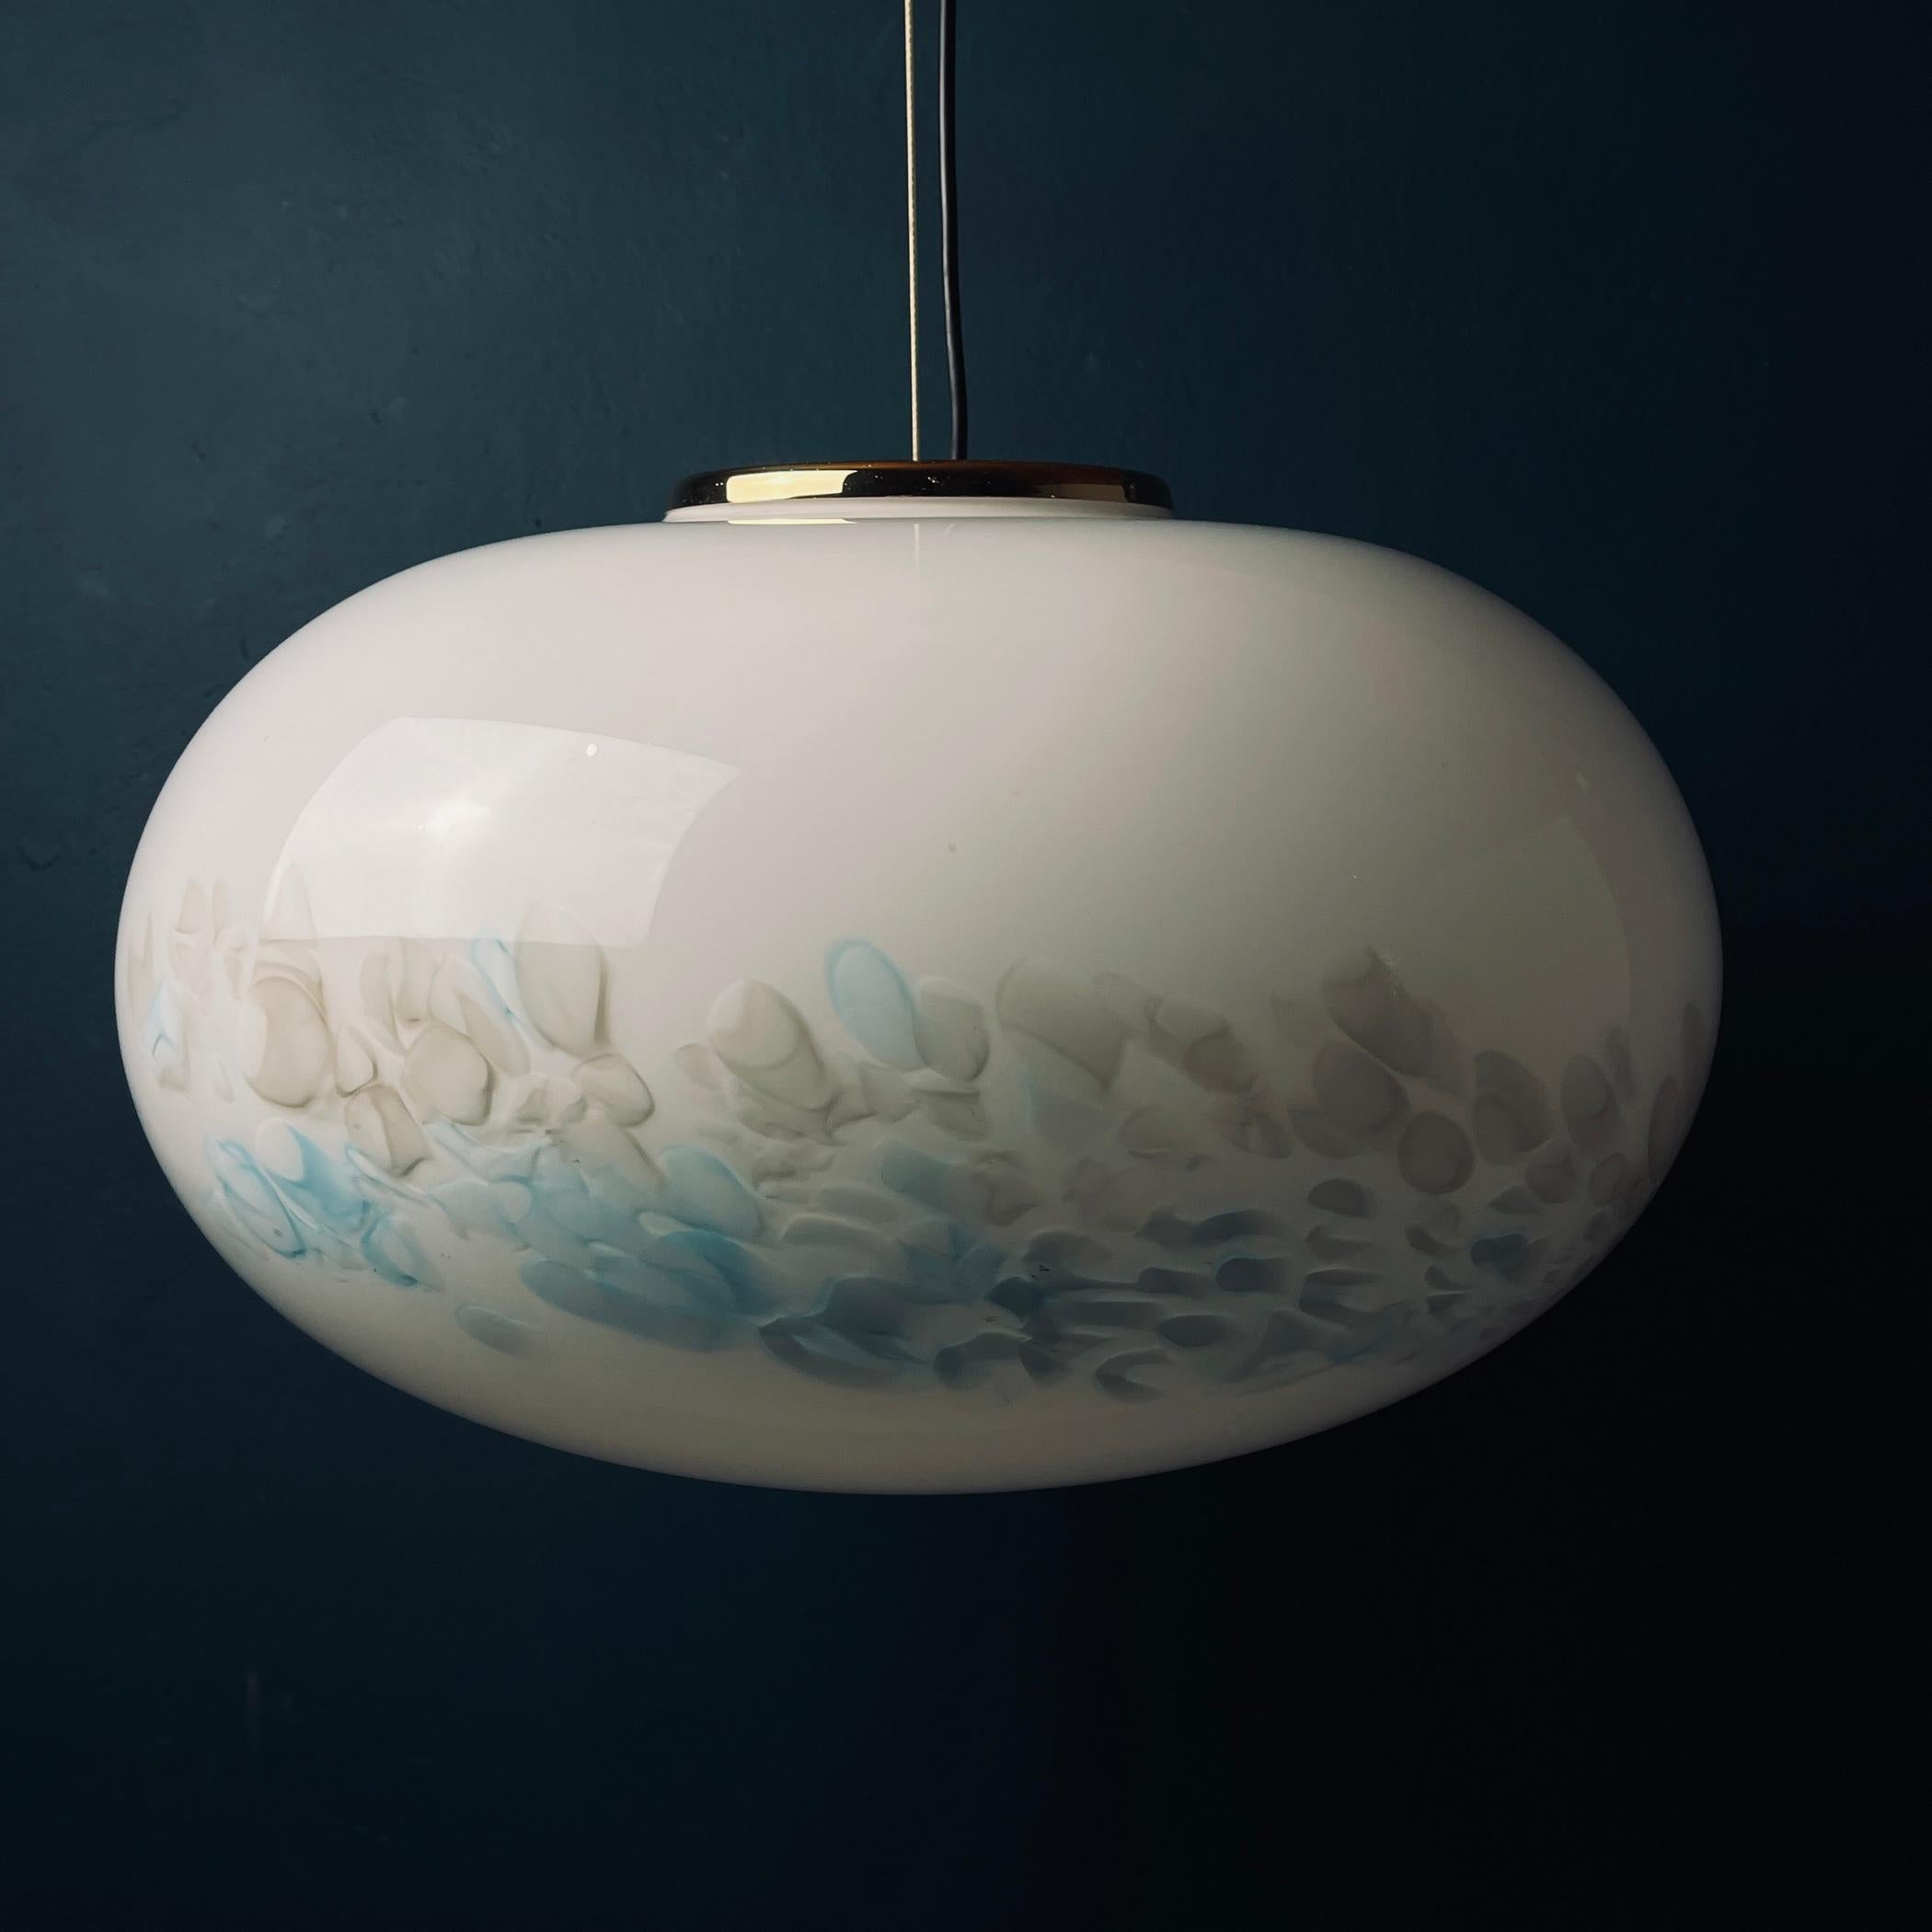 Classic white murano pendant lamp made in Italy in the 1980s. Very beautiful white Murano glass with blue spots in the form of a sphere. The lamp is in perfect condition, fully functional. No chips or cracks. Maximum height with cable 120 cm. The